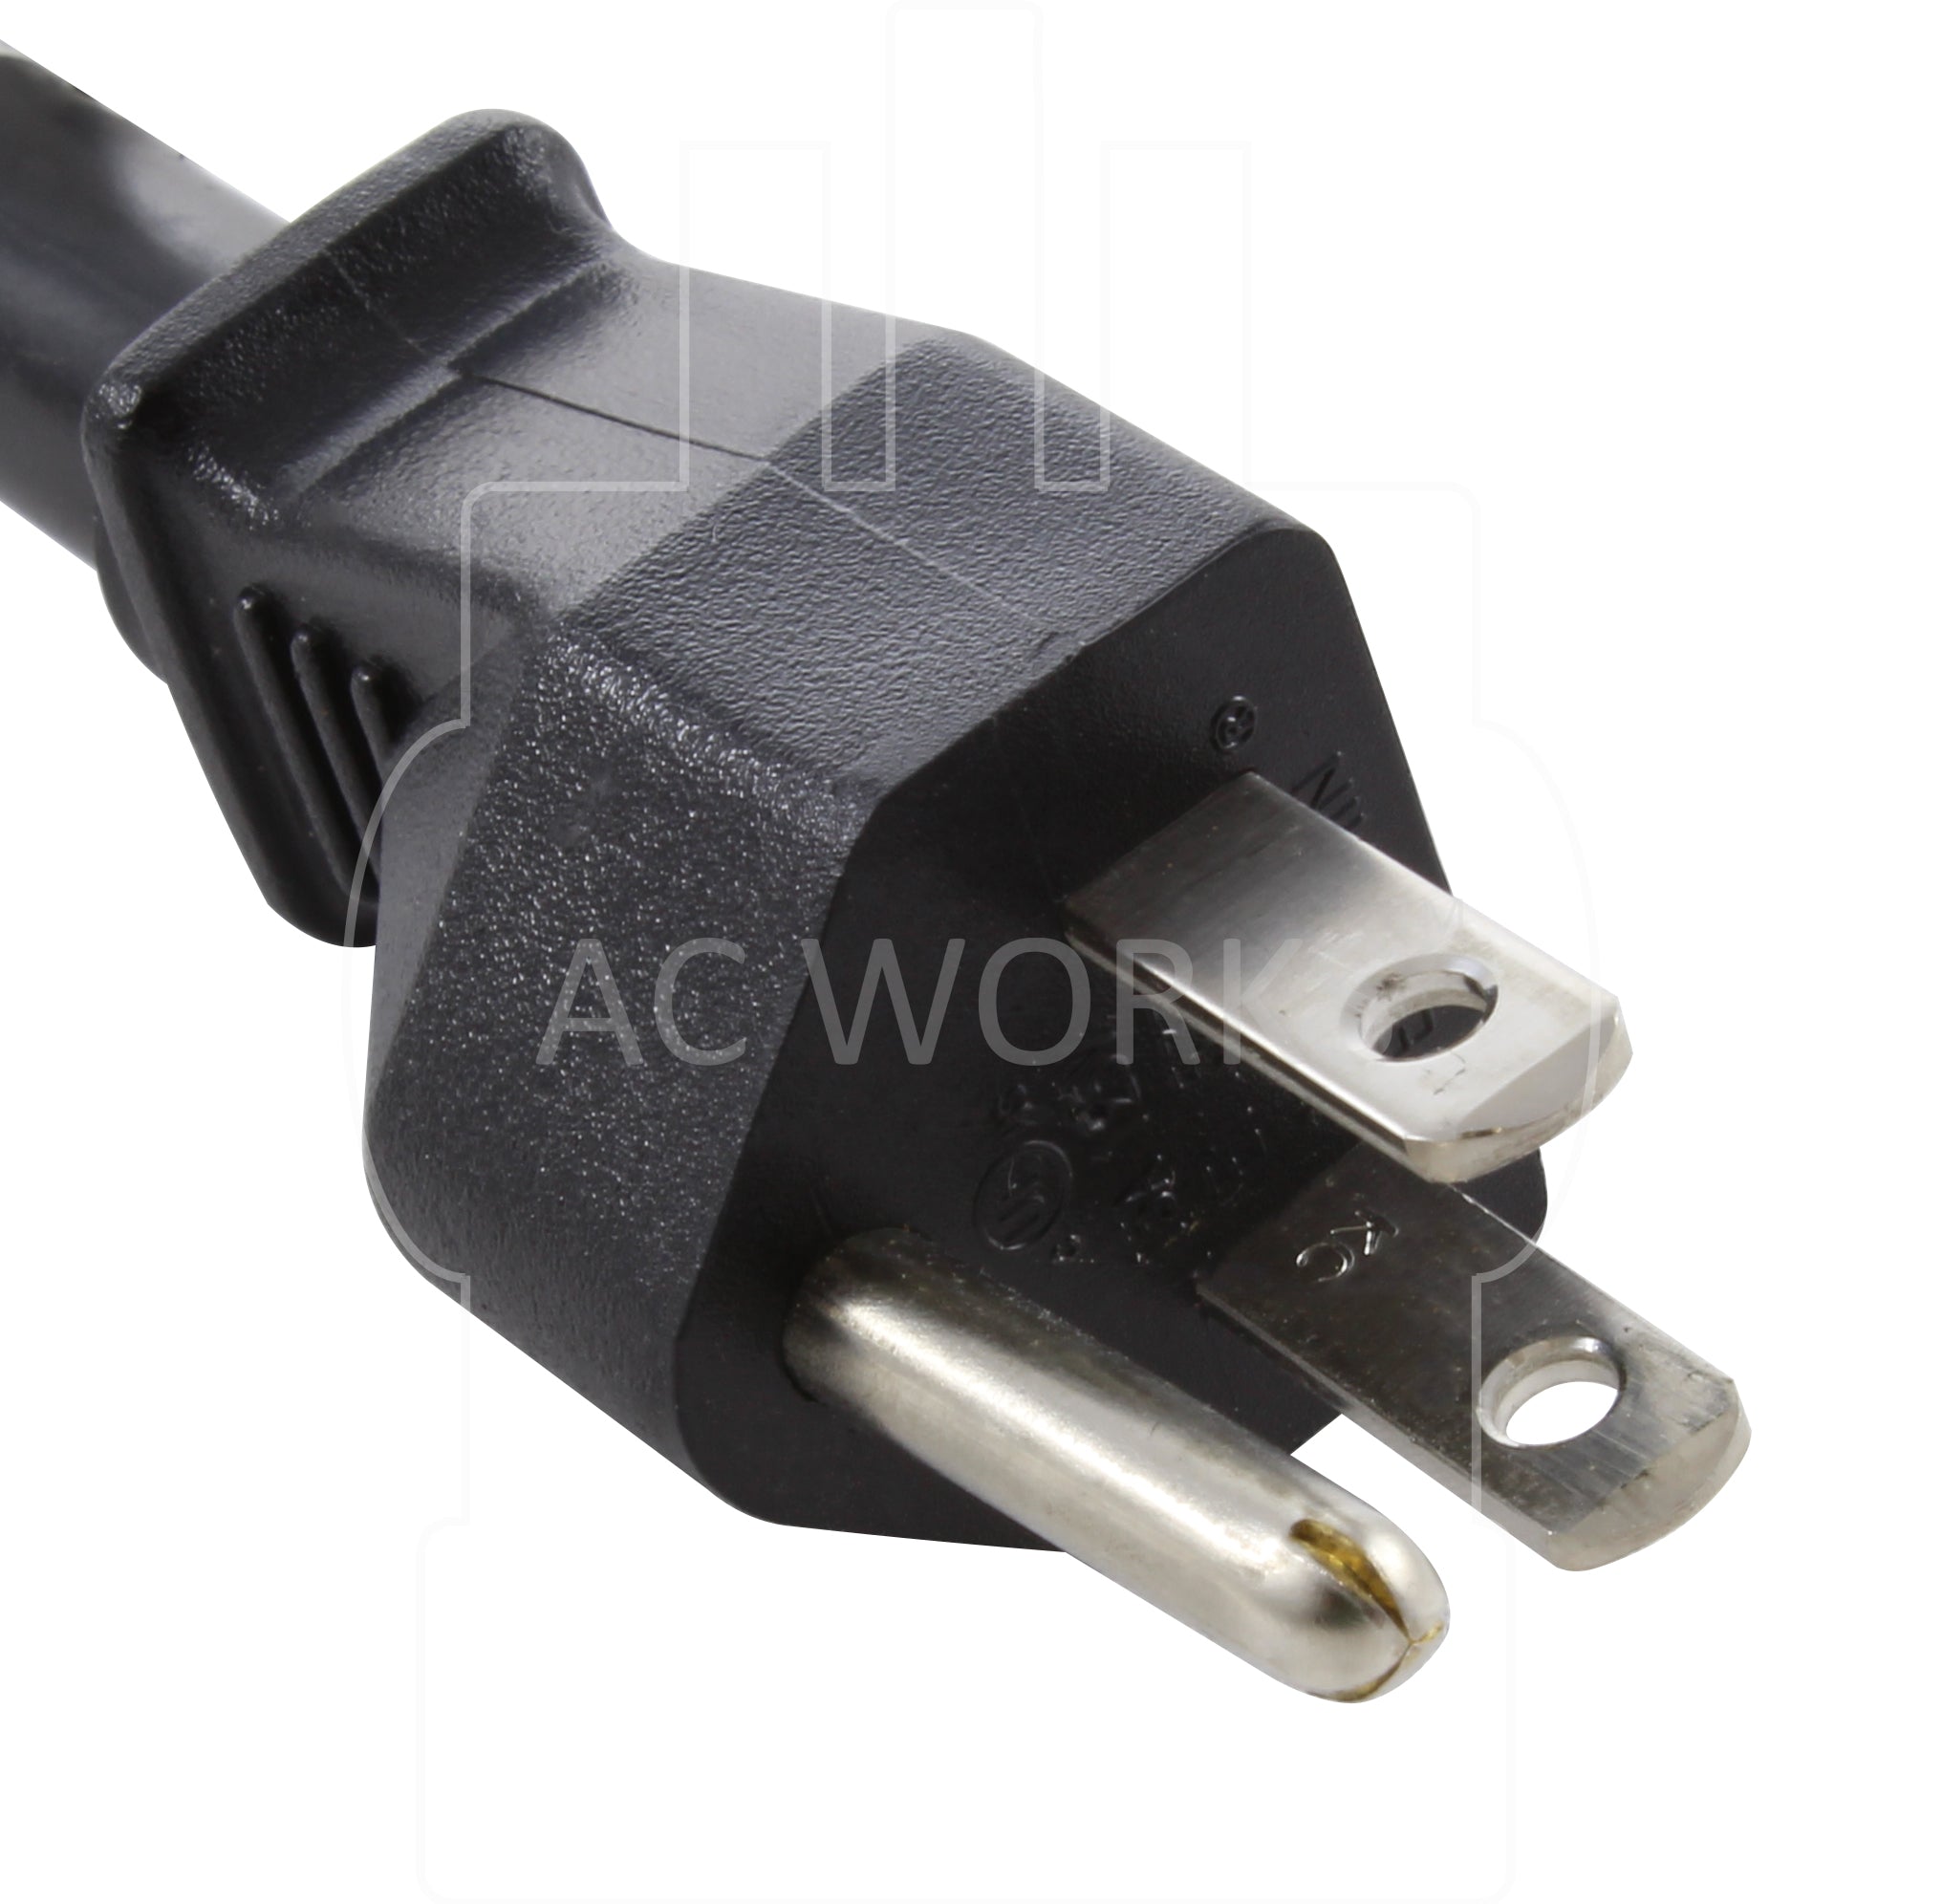 1 ft. 12/3 SJTW 15Amp to 20 Amp Adapter Cord NEMA 5-15P to 5-20R